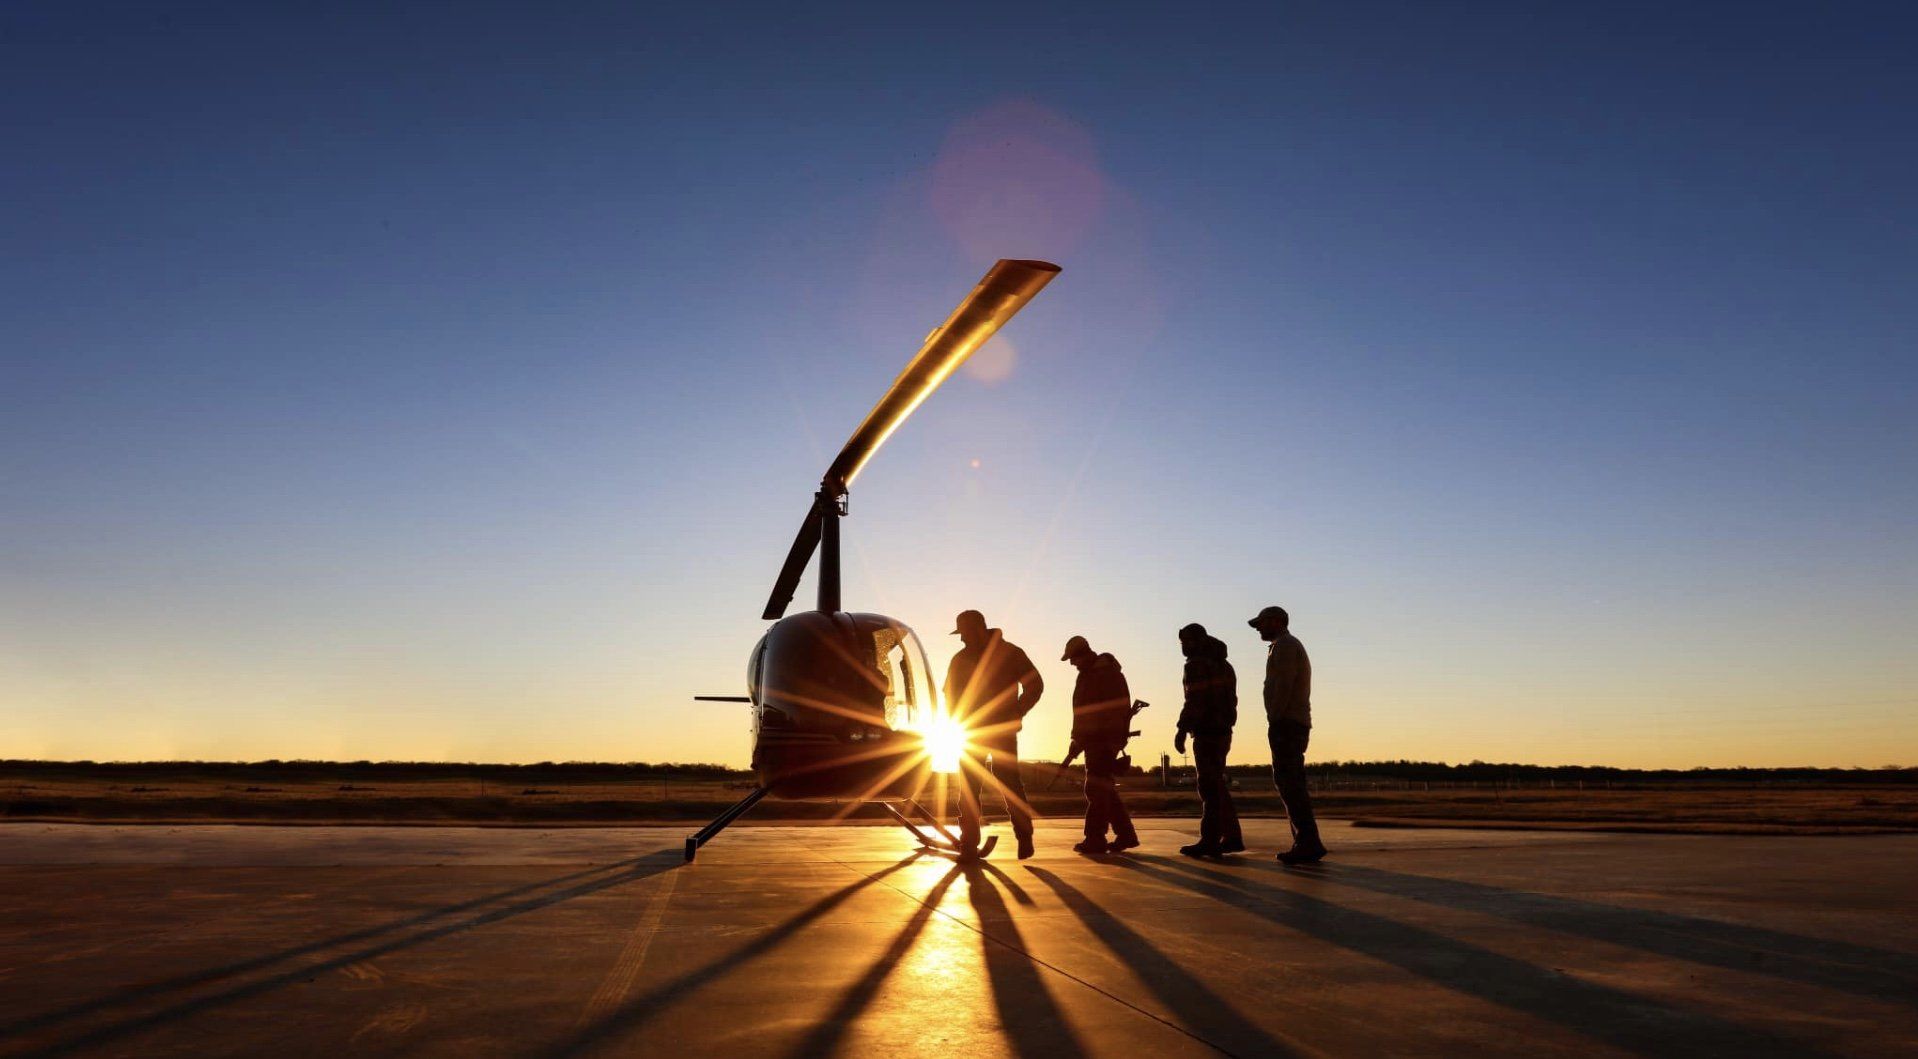 a group of people are standing in front of a helicopter at sunset.